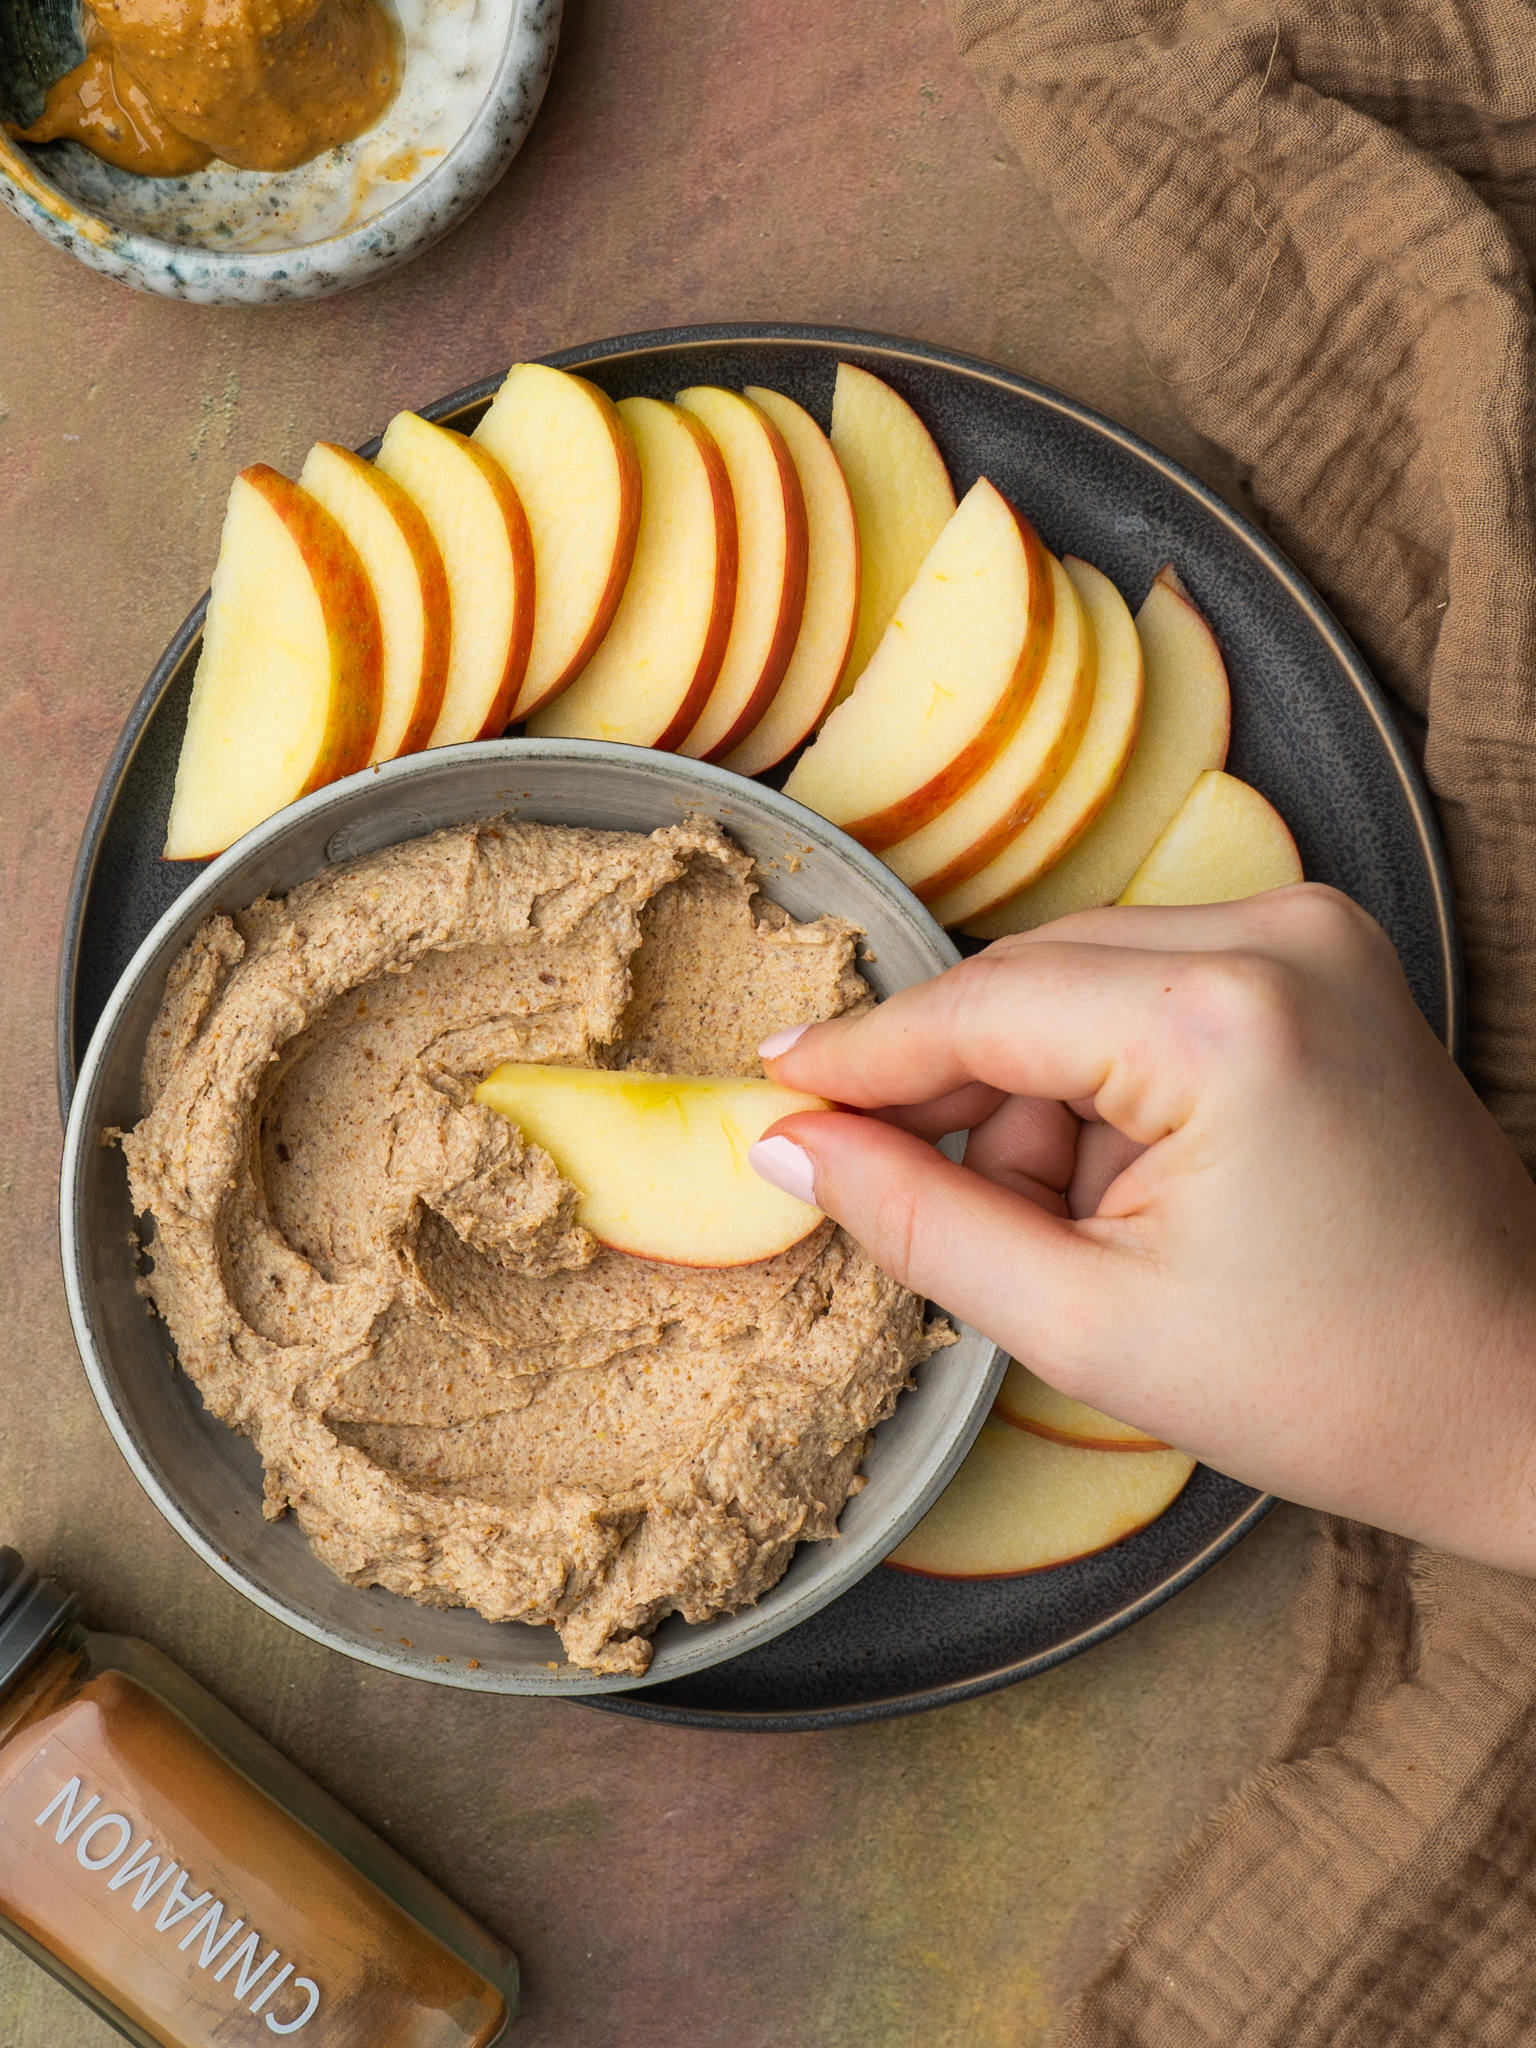 Above view of a hand holding an apple dipping into a peanut butter dip